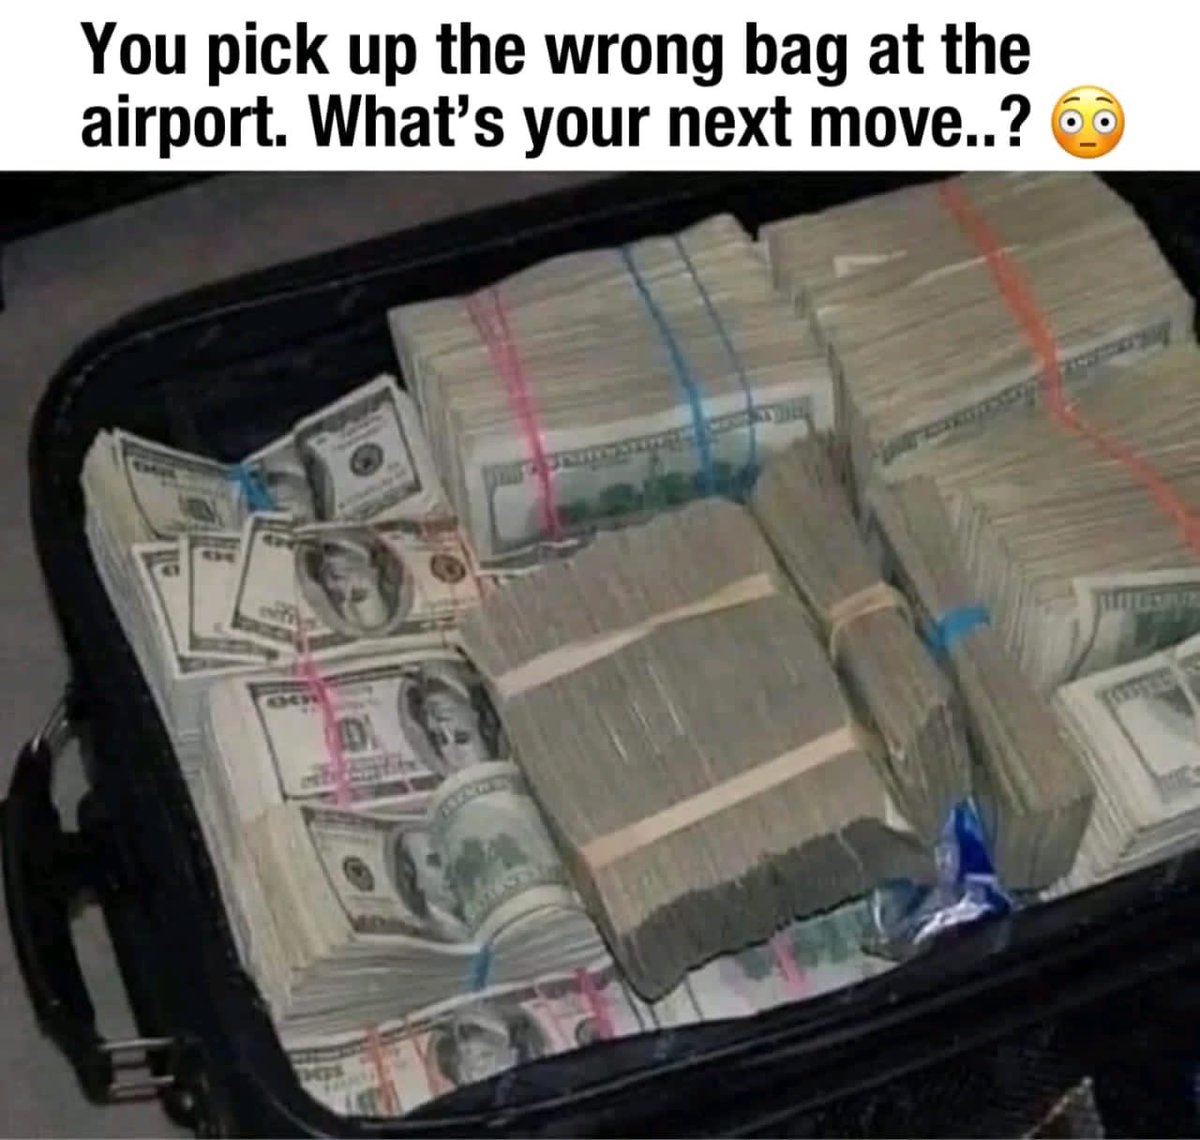 You pick up the wrong bag at the airport. What's your next move.?